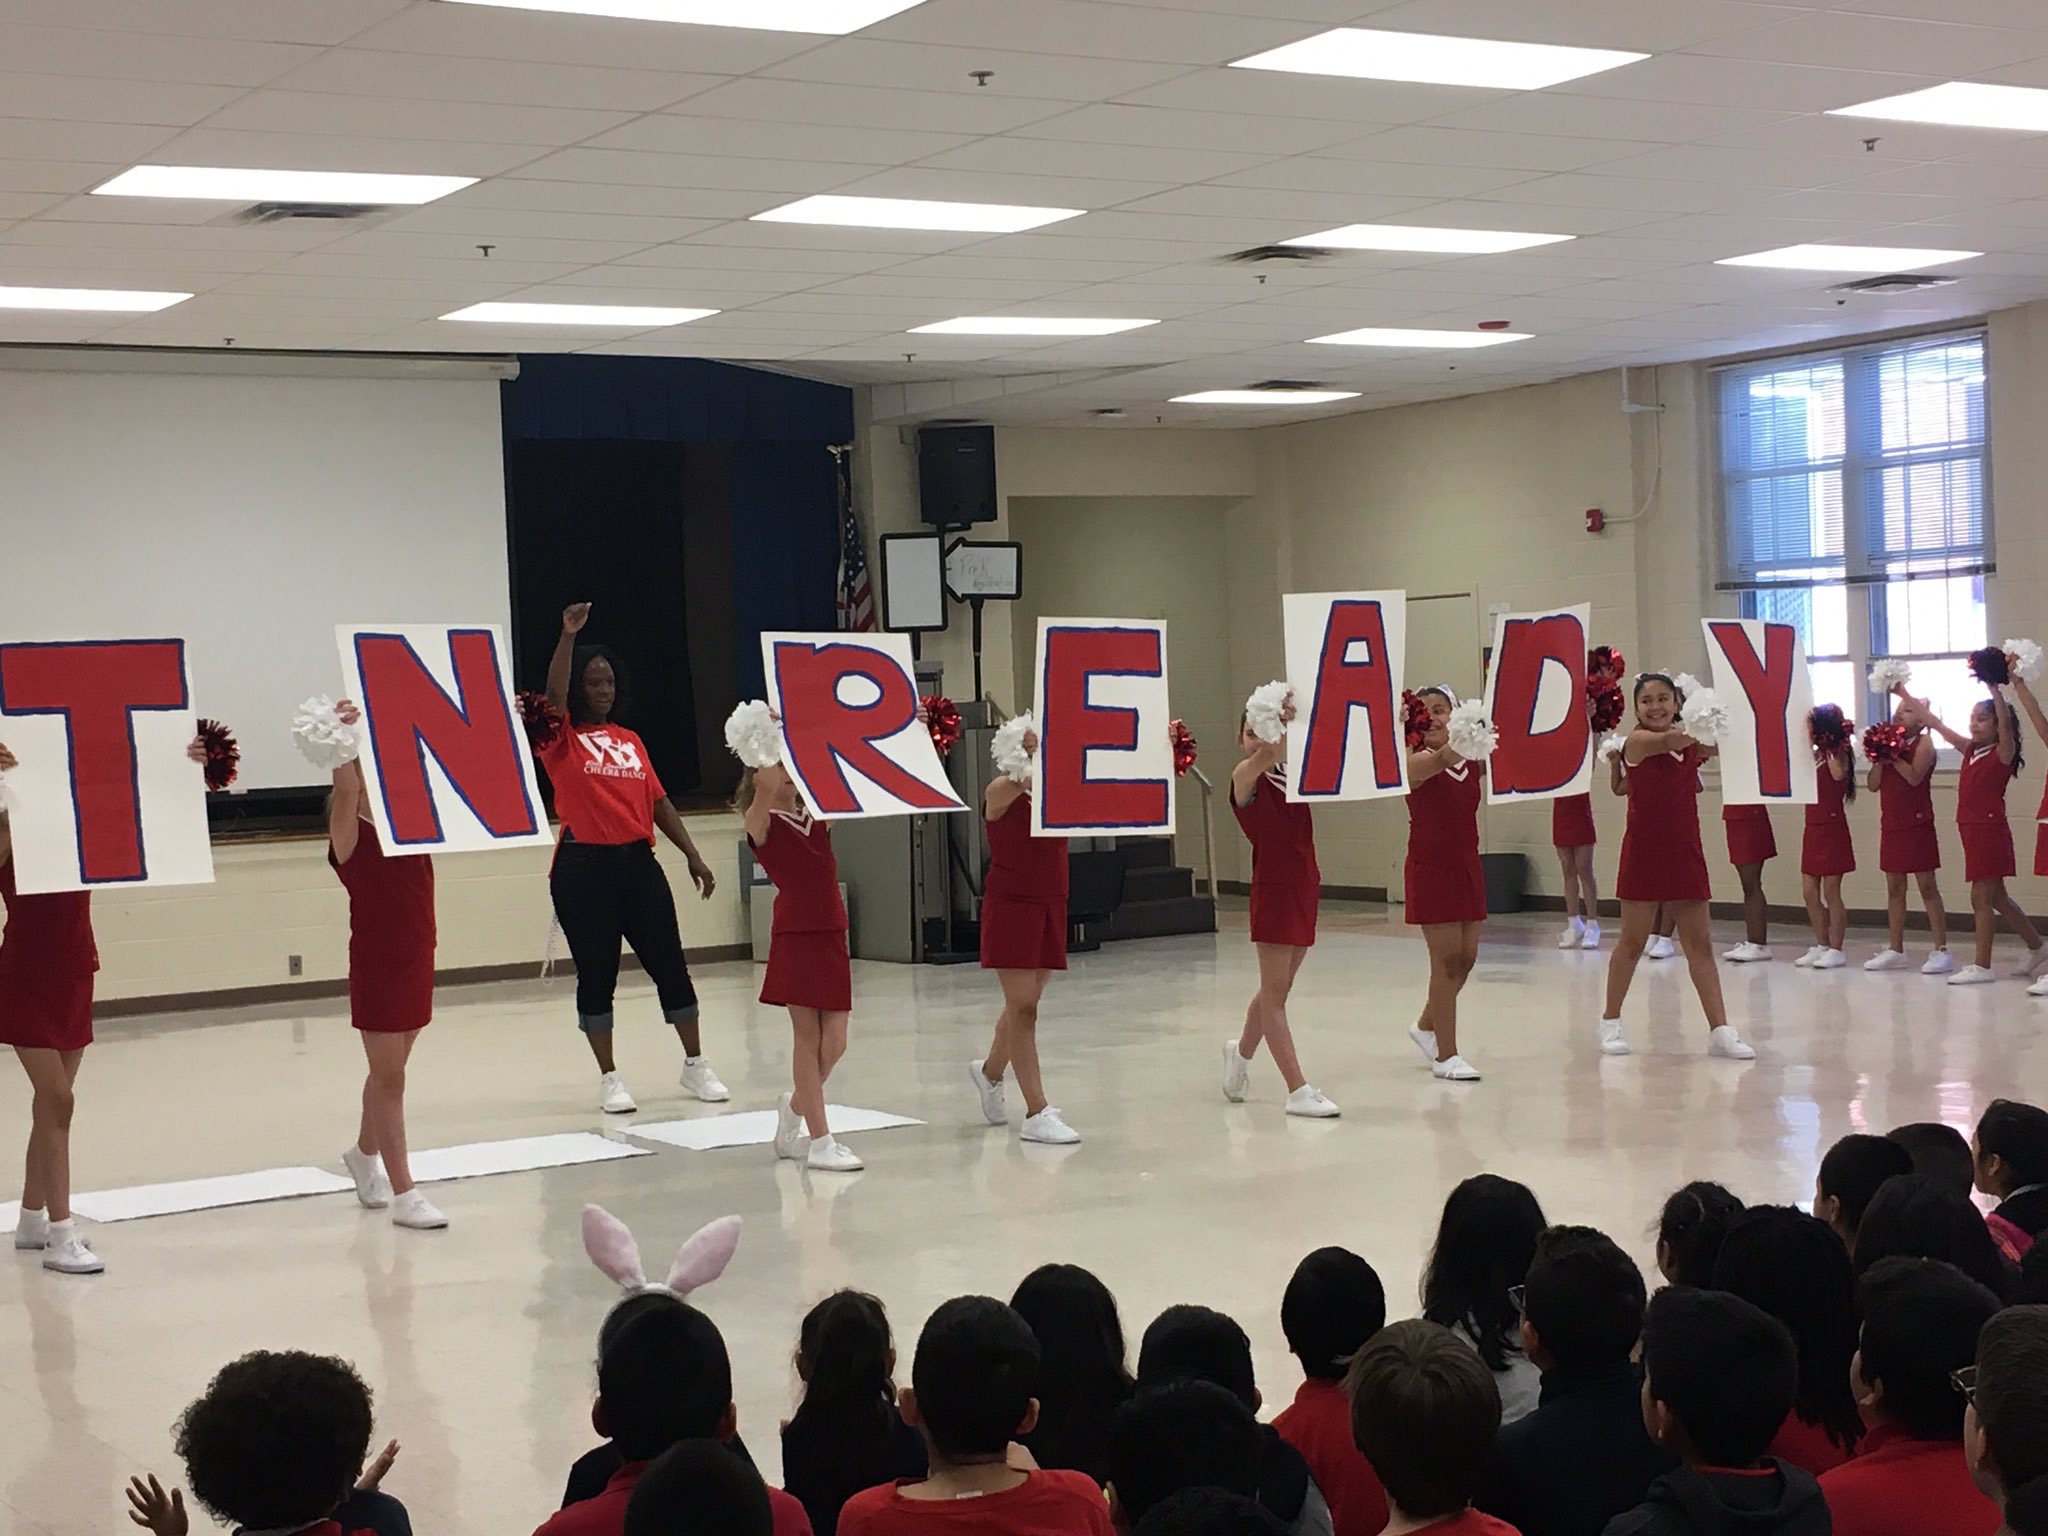 Students at Wells Station Elementary School in Memphis hold a pep rally before the launch of state tests, which took place between April 17 and May 5 across Tennessee.